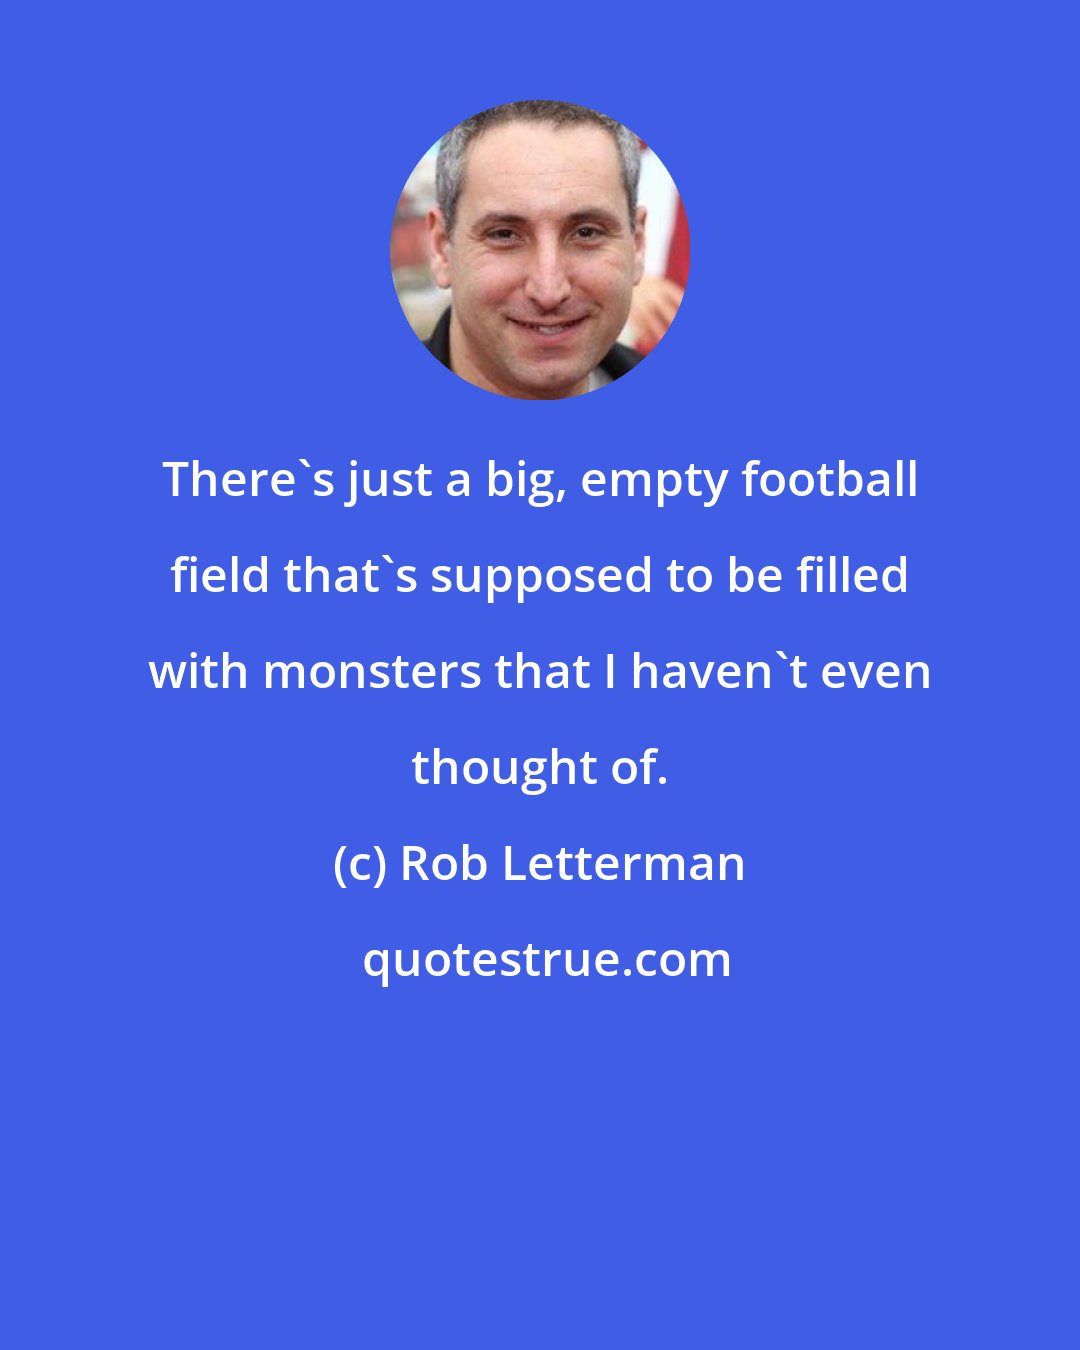 Rob Letterman: There's just a big, empty football field that's supposed to be filled with monsters that I haven't even thought of.